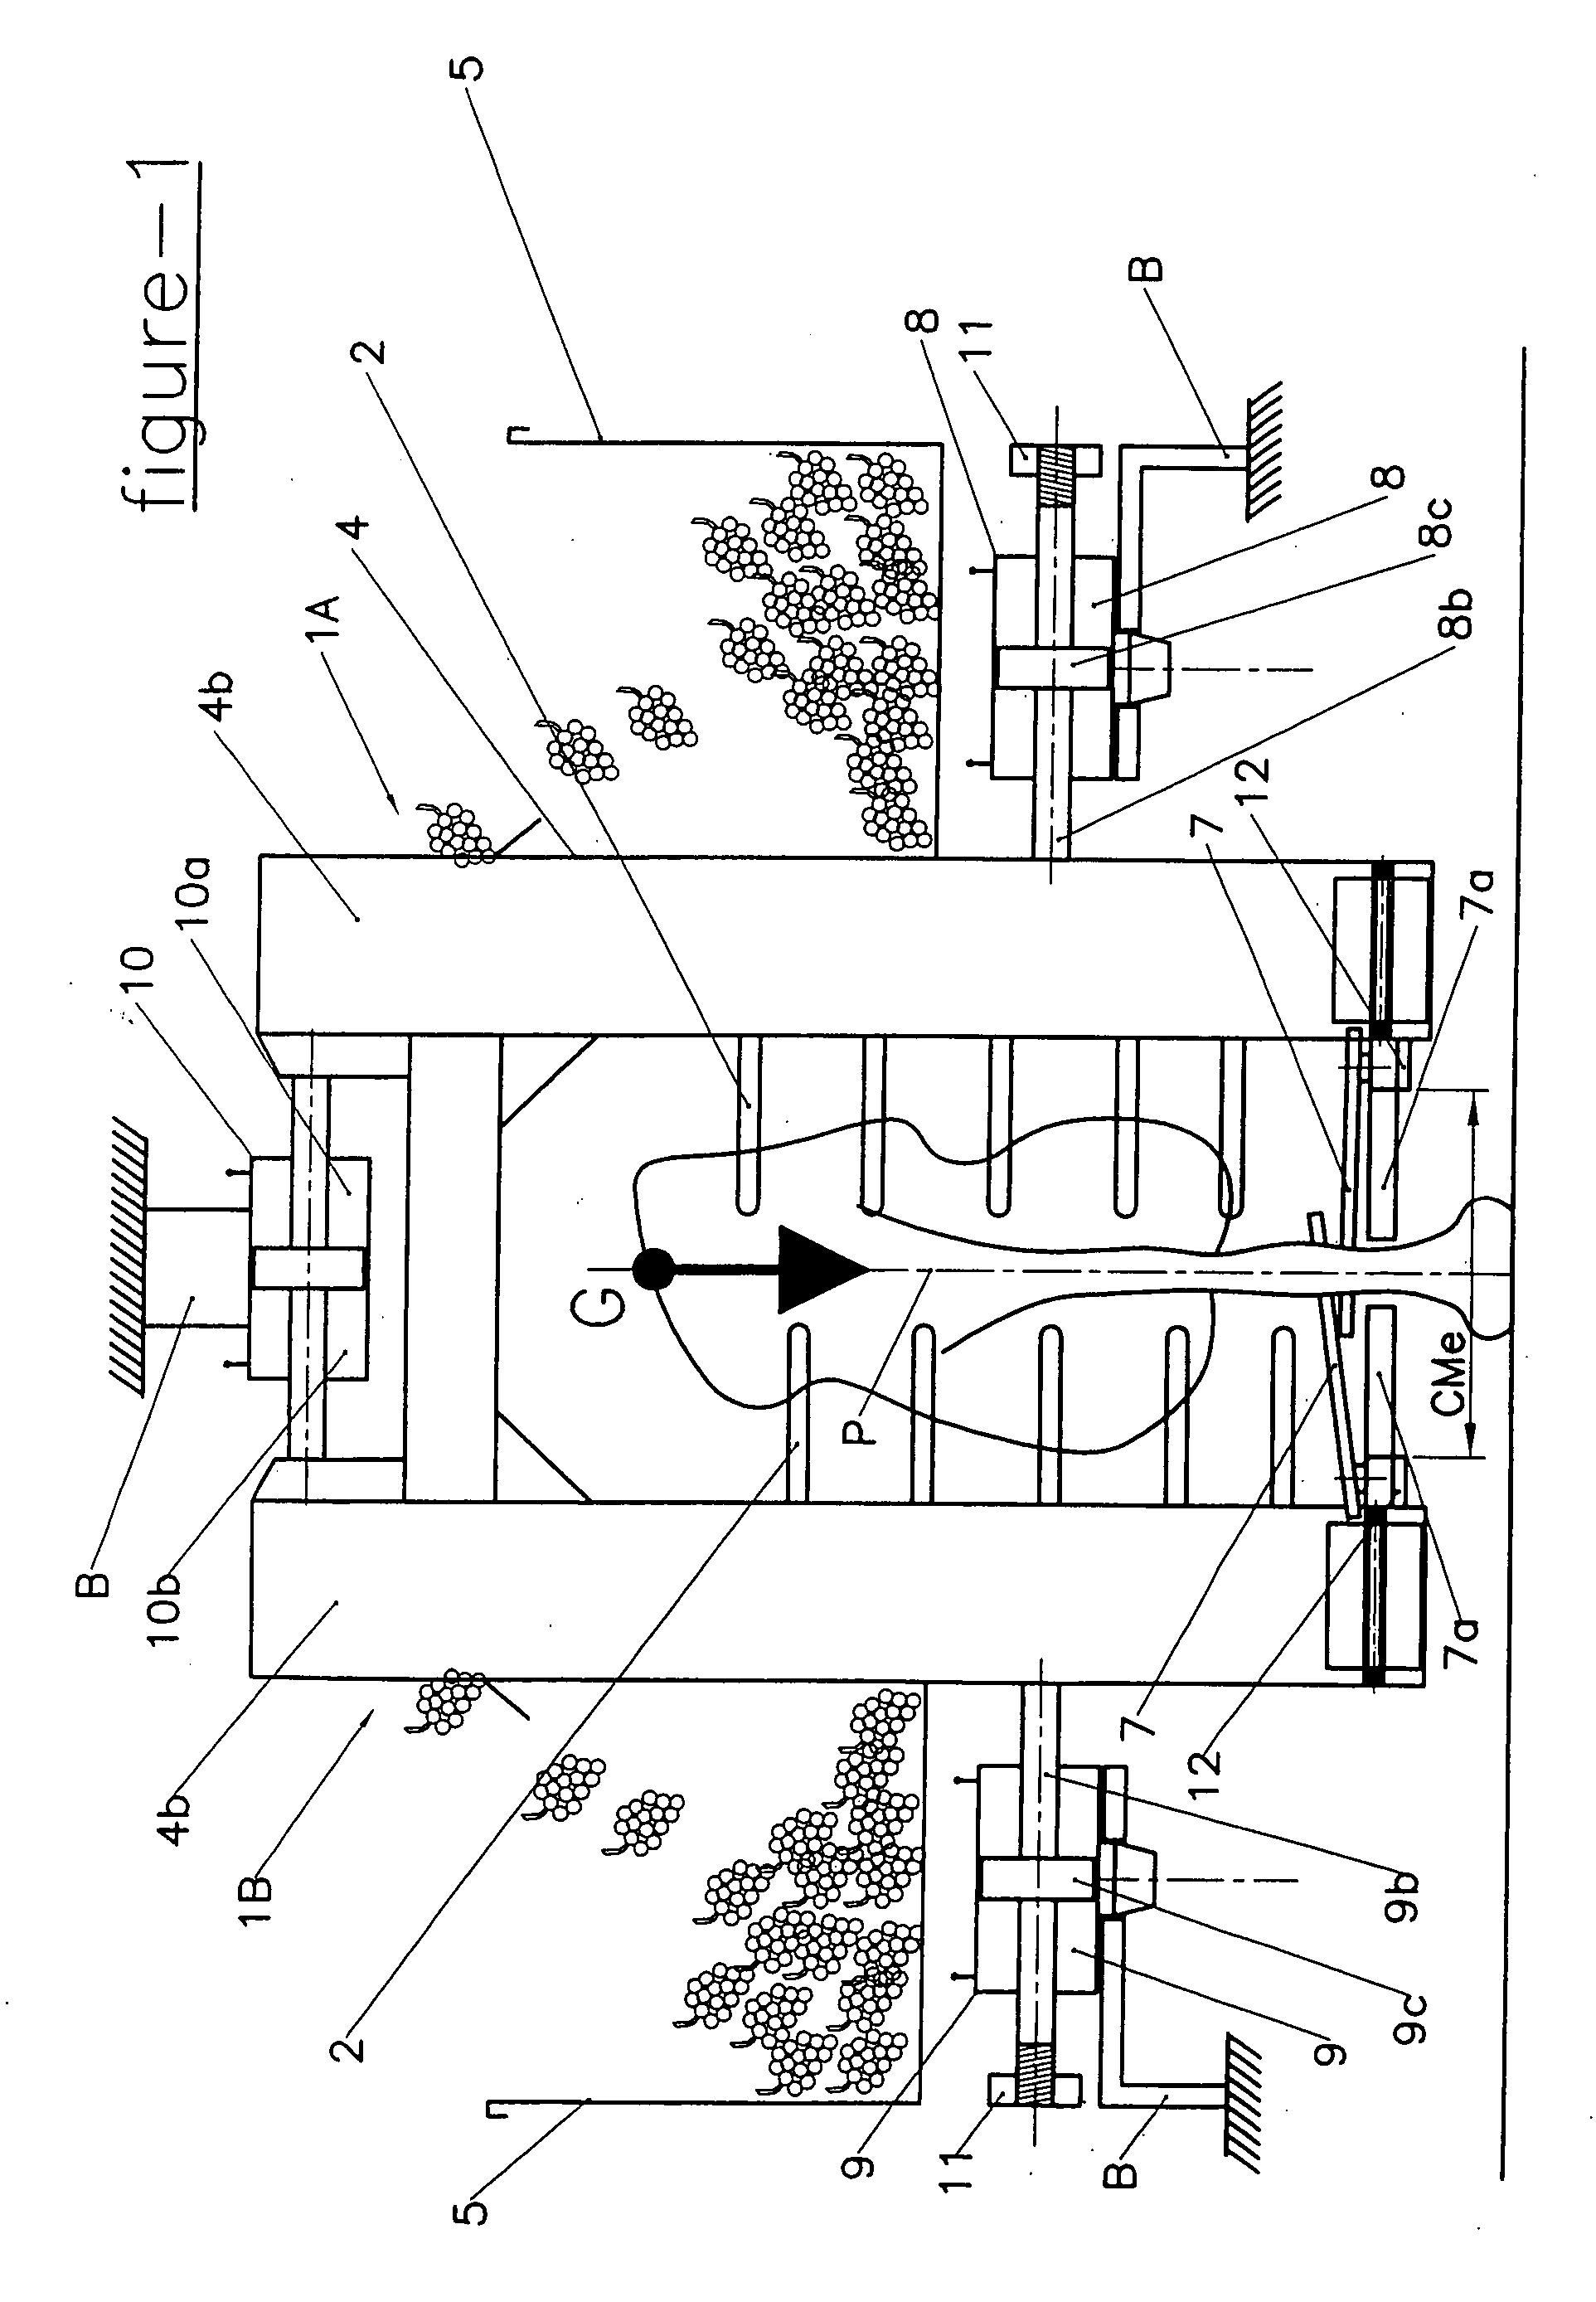 Self-centering straddling harvesting head for small fruit harvesting machine and machine equipped with such harvesting head